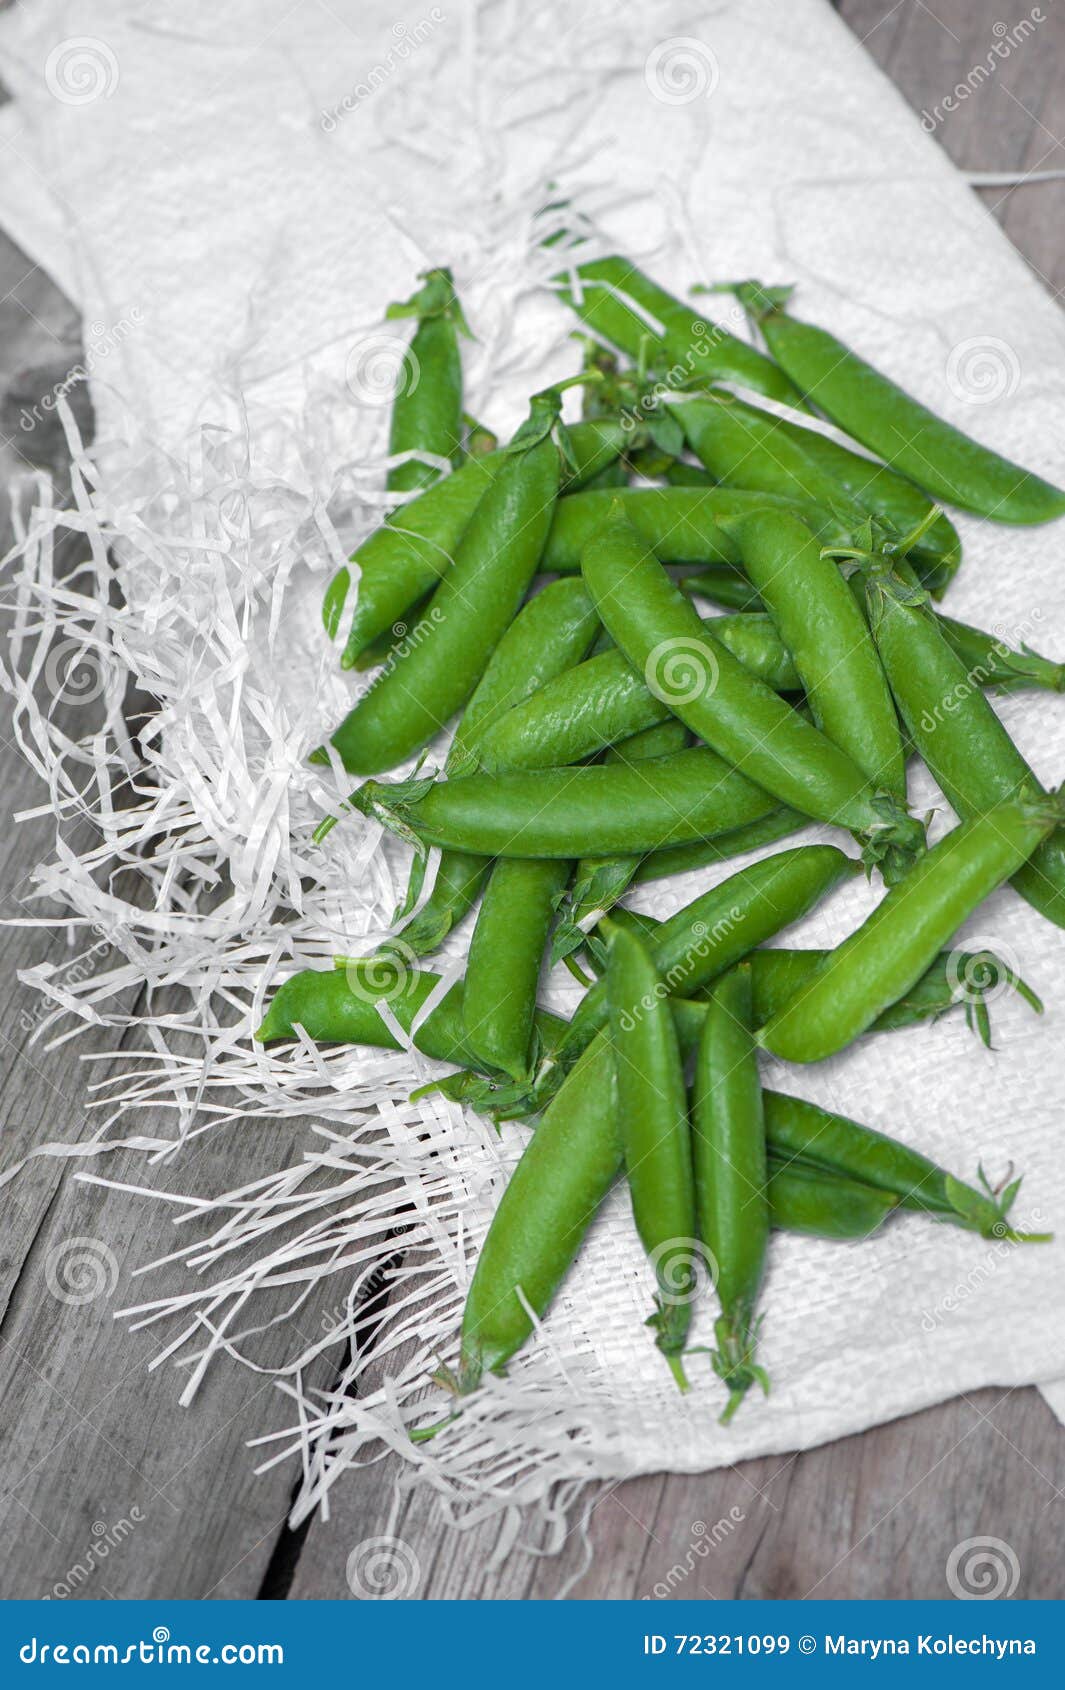 Fresh, young green peas. stock image. Image of dieting - 72321099